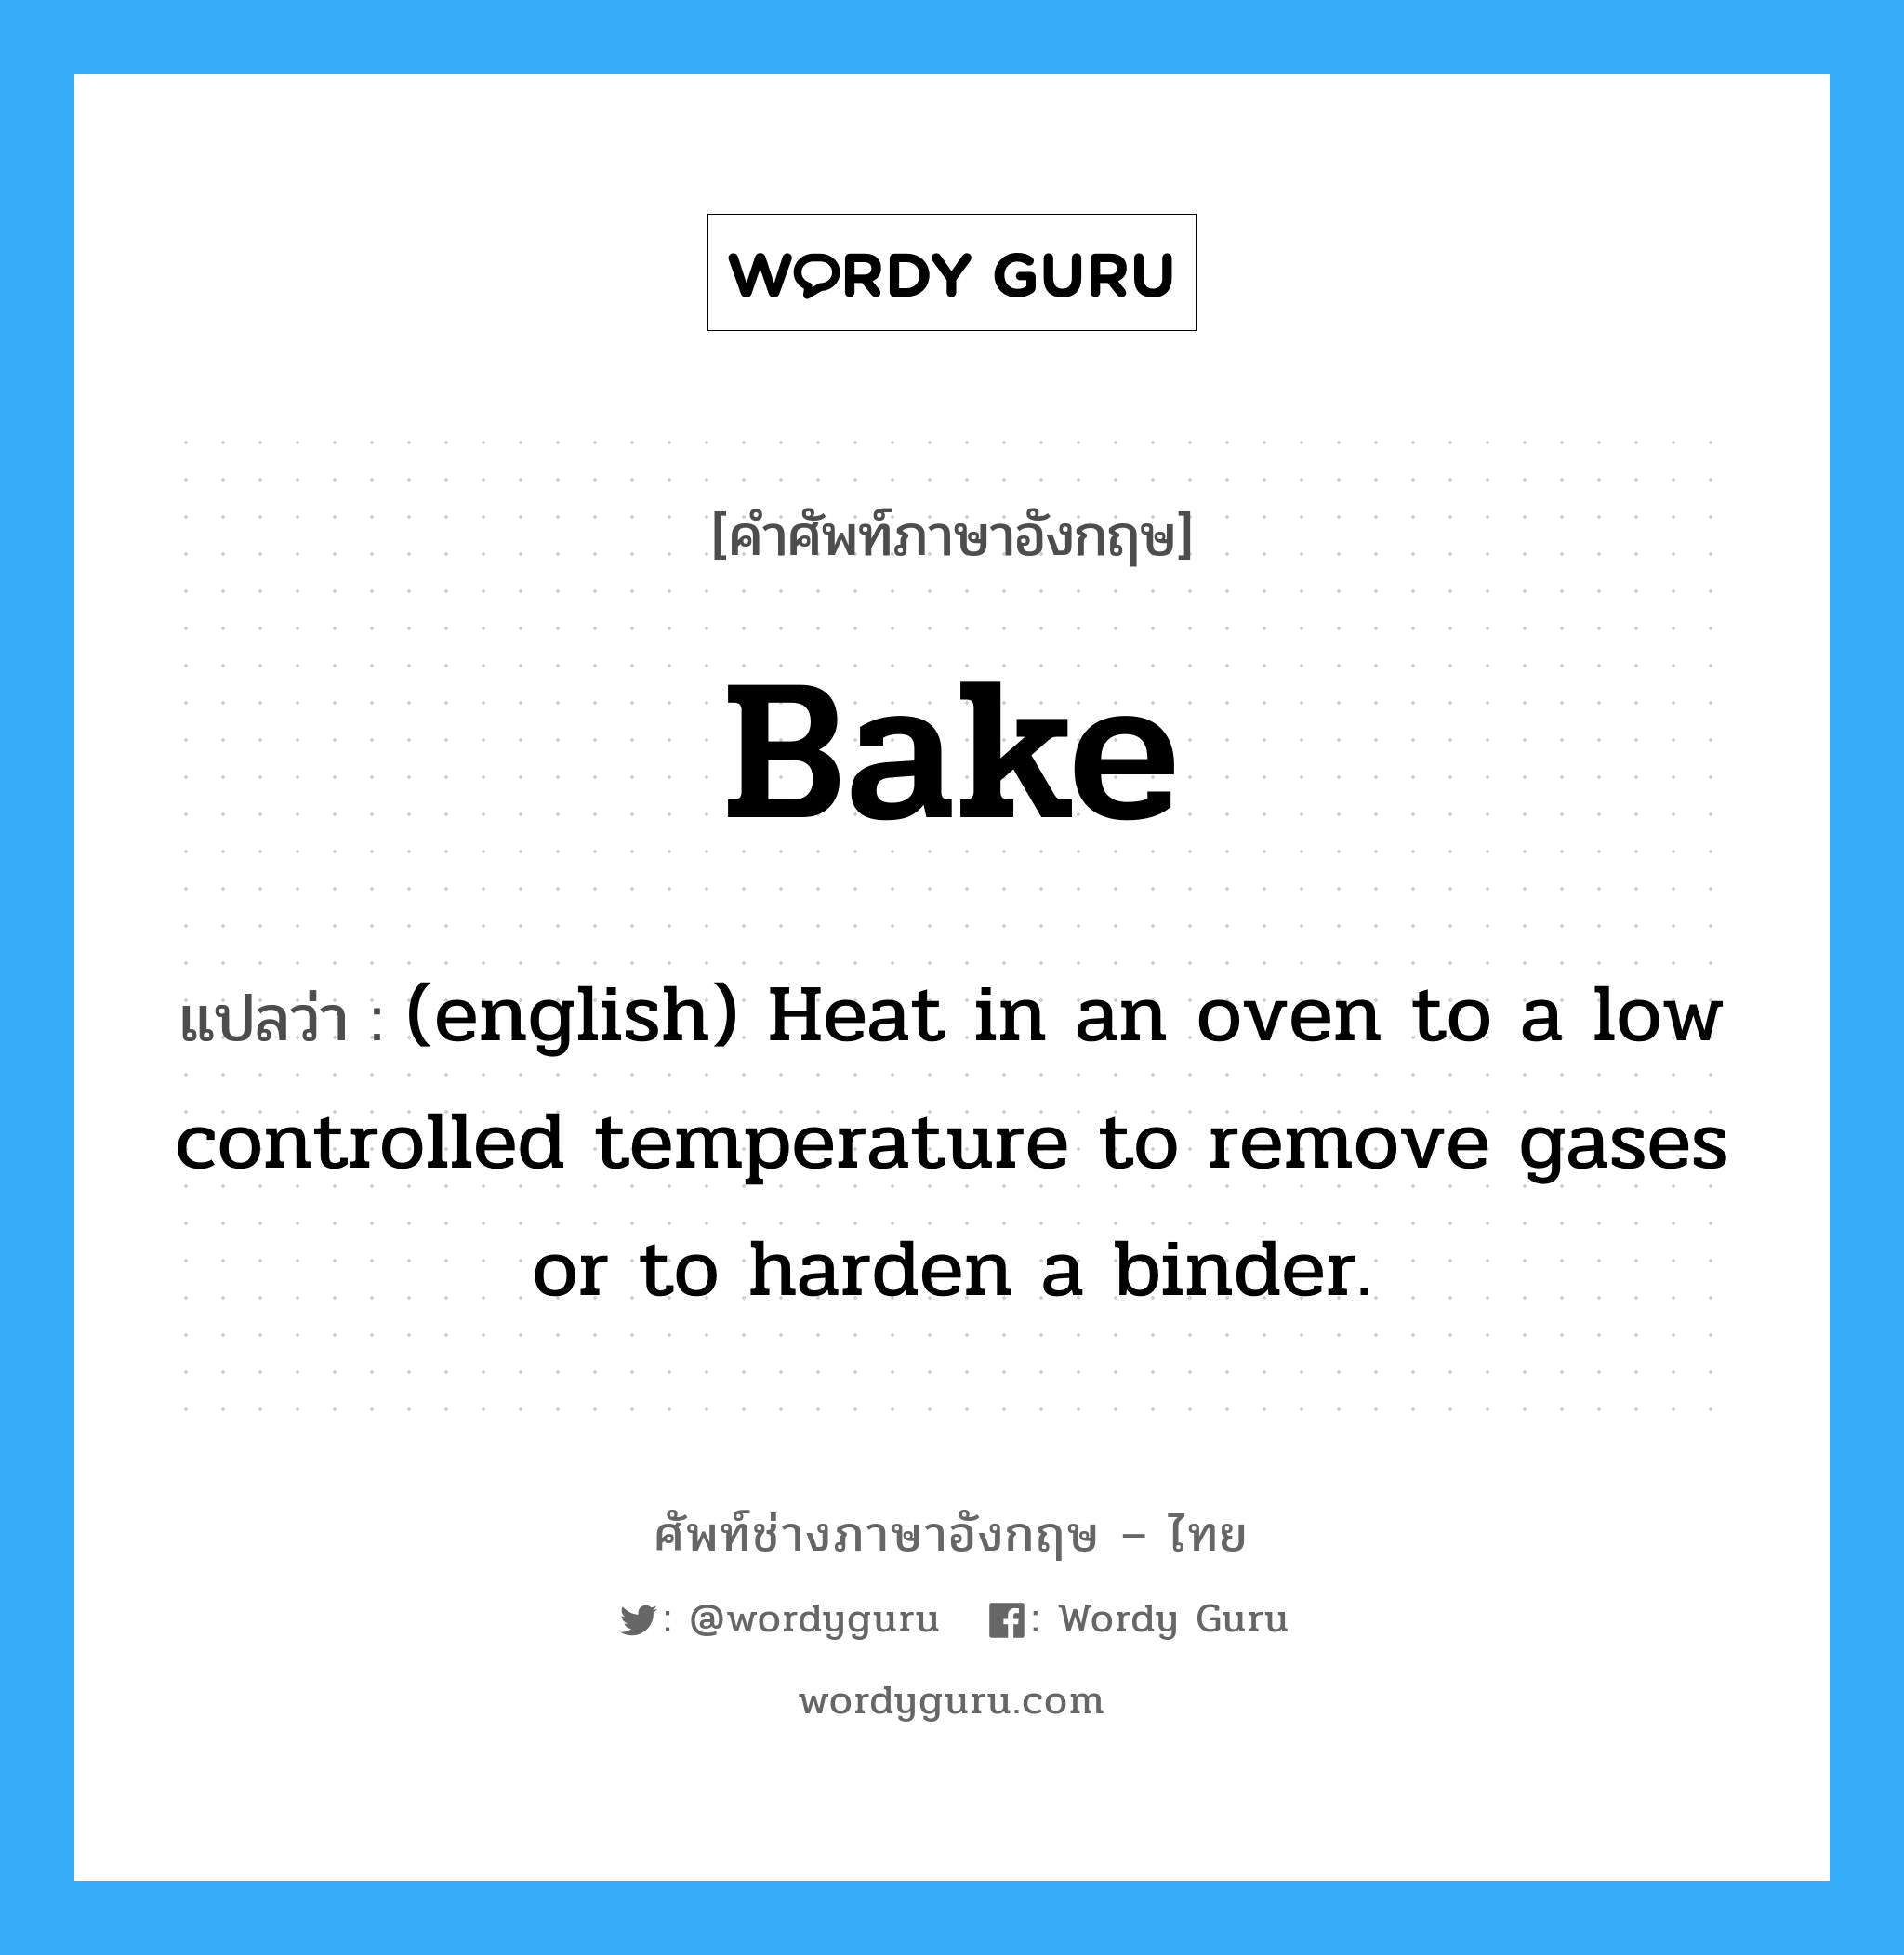 Bake แปลว่า?, คำศัพท์ช่างภาษาอังกฤษ - ไทย Bake คำศัพท์ภาษาอังกฤษ Bake แปลว่า (english) Heat in an oven to a low controlled temperature to remove gases or to harden a binder.